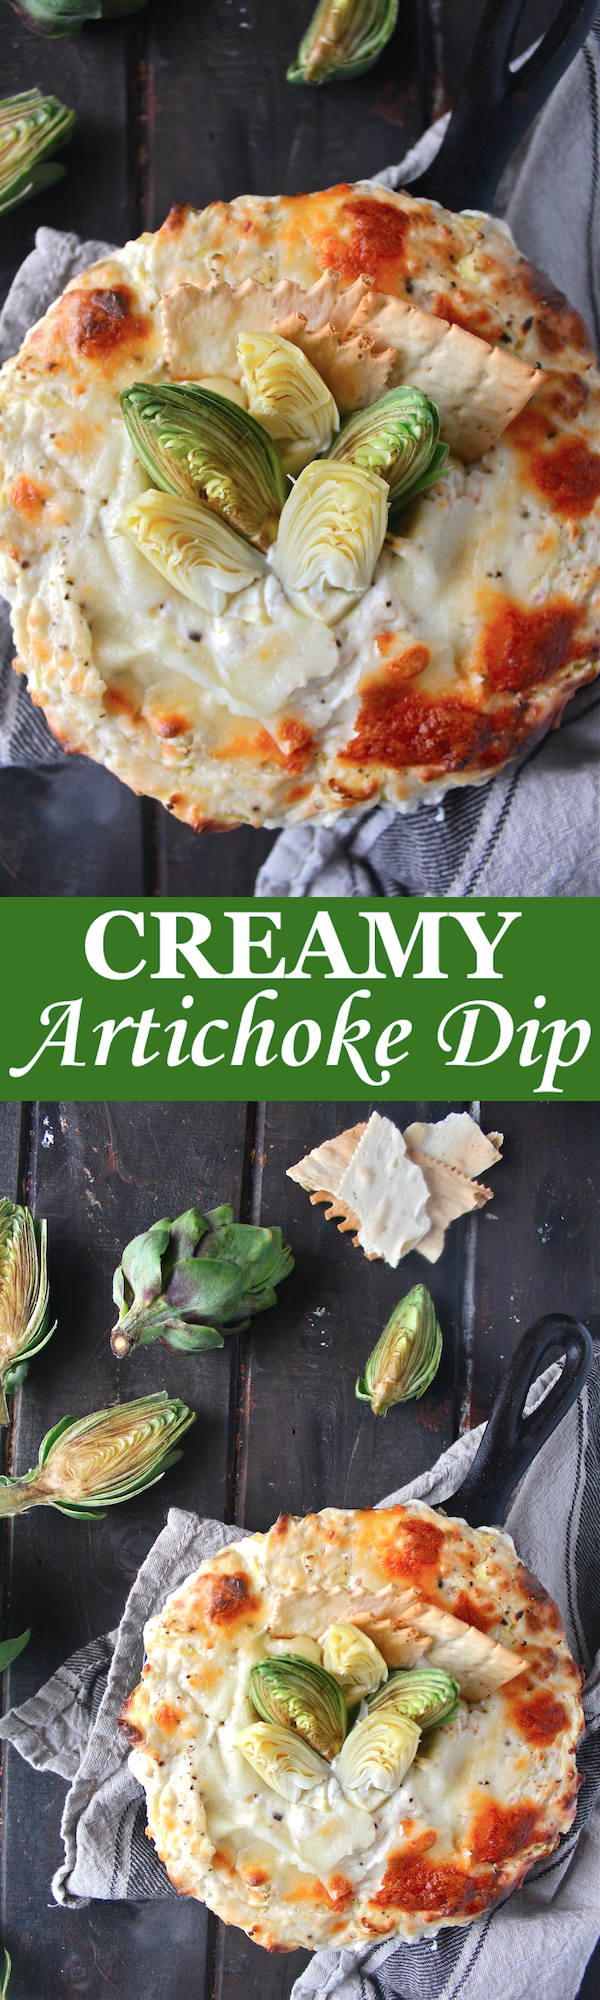 This Creamy Artichoke Dip - with lots of tangy cream cheese, rich mozzarella, and chopped artichokes - is a decadent and delicious party appetizer! | The Millennial Cook #appetizer #artichokedip #artichoke #creamcheese